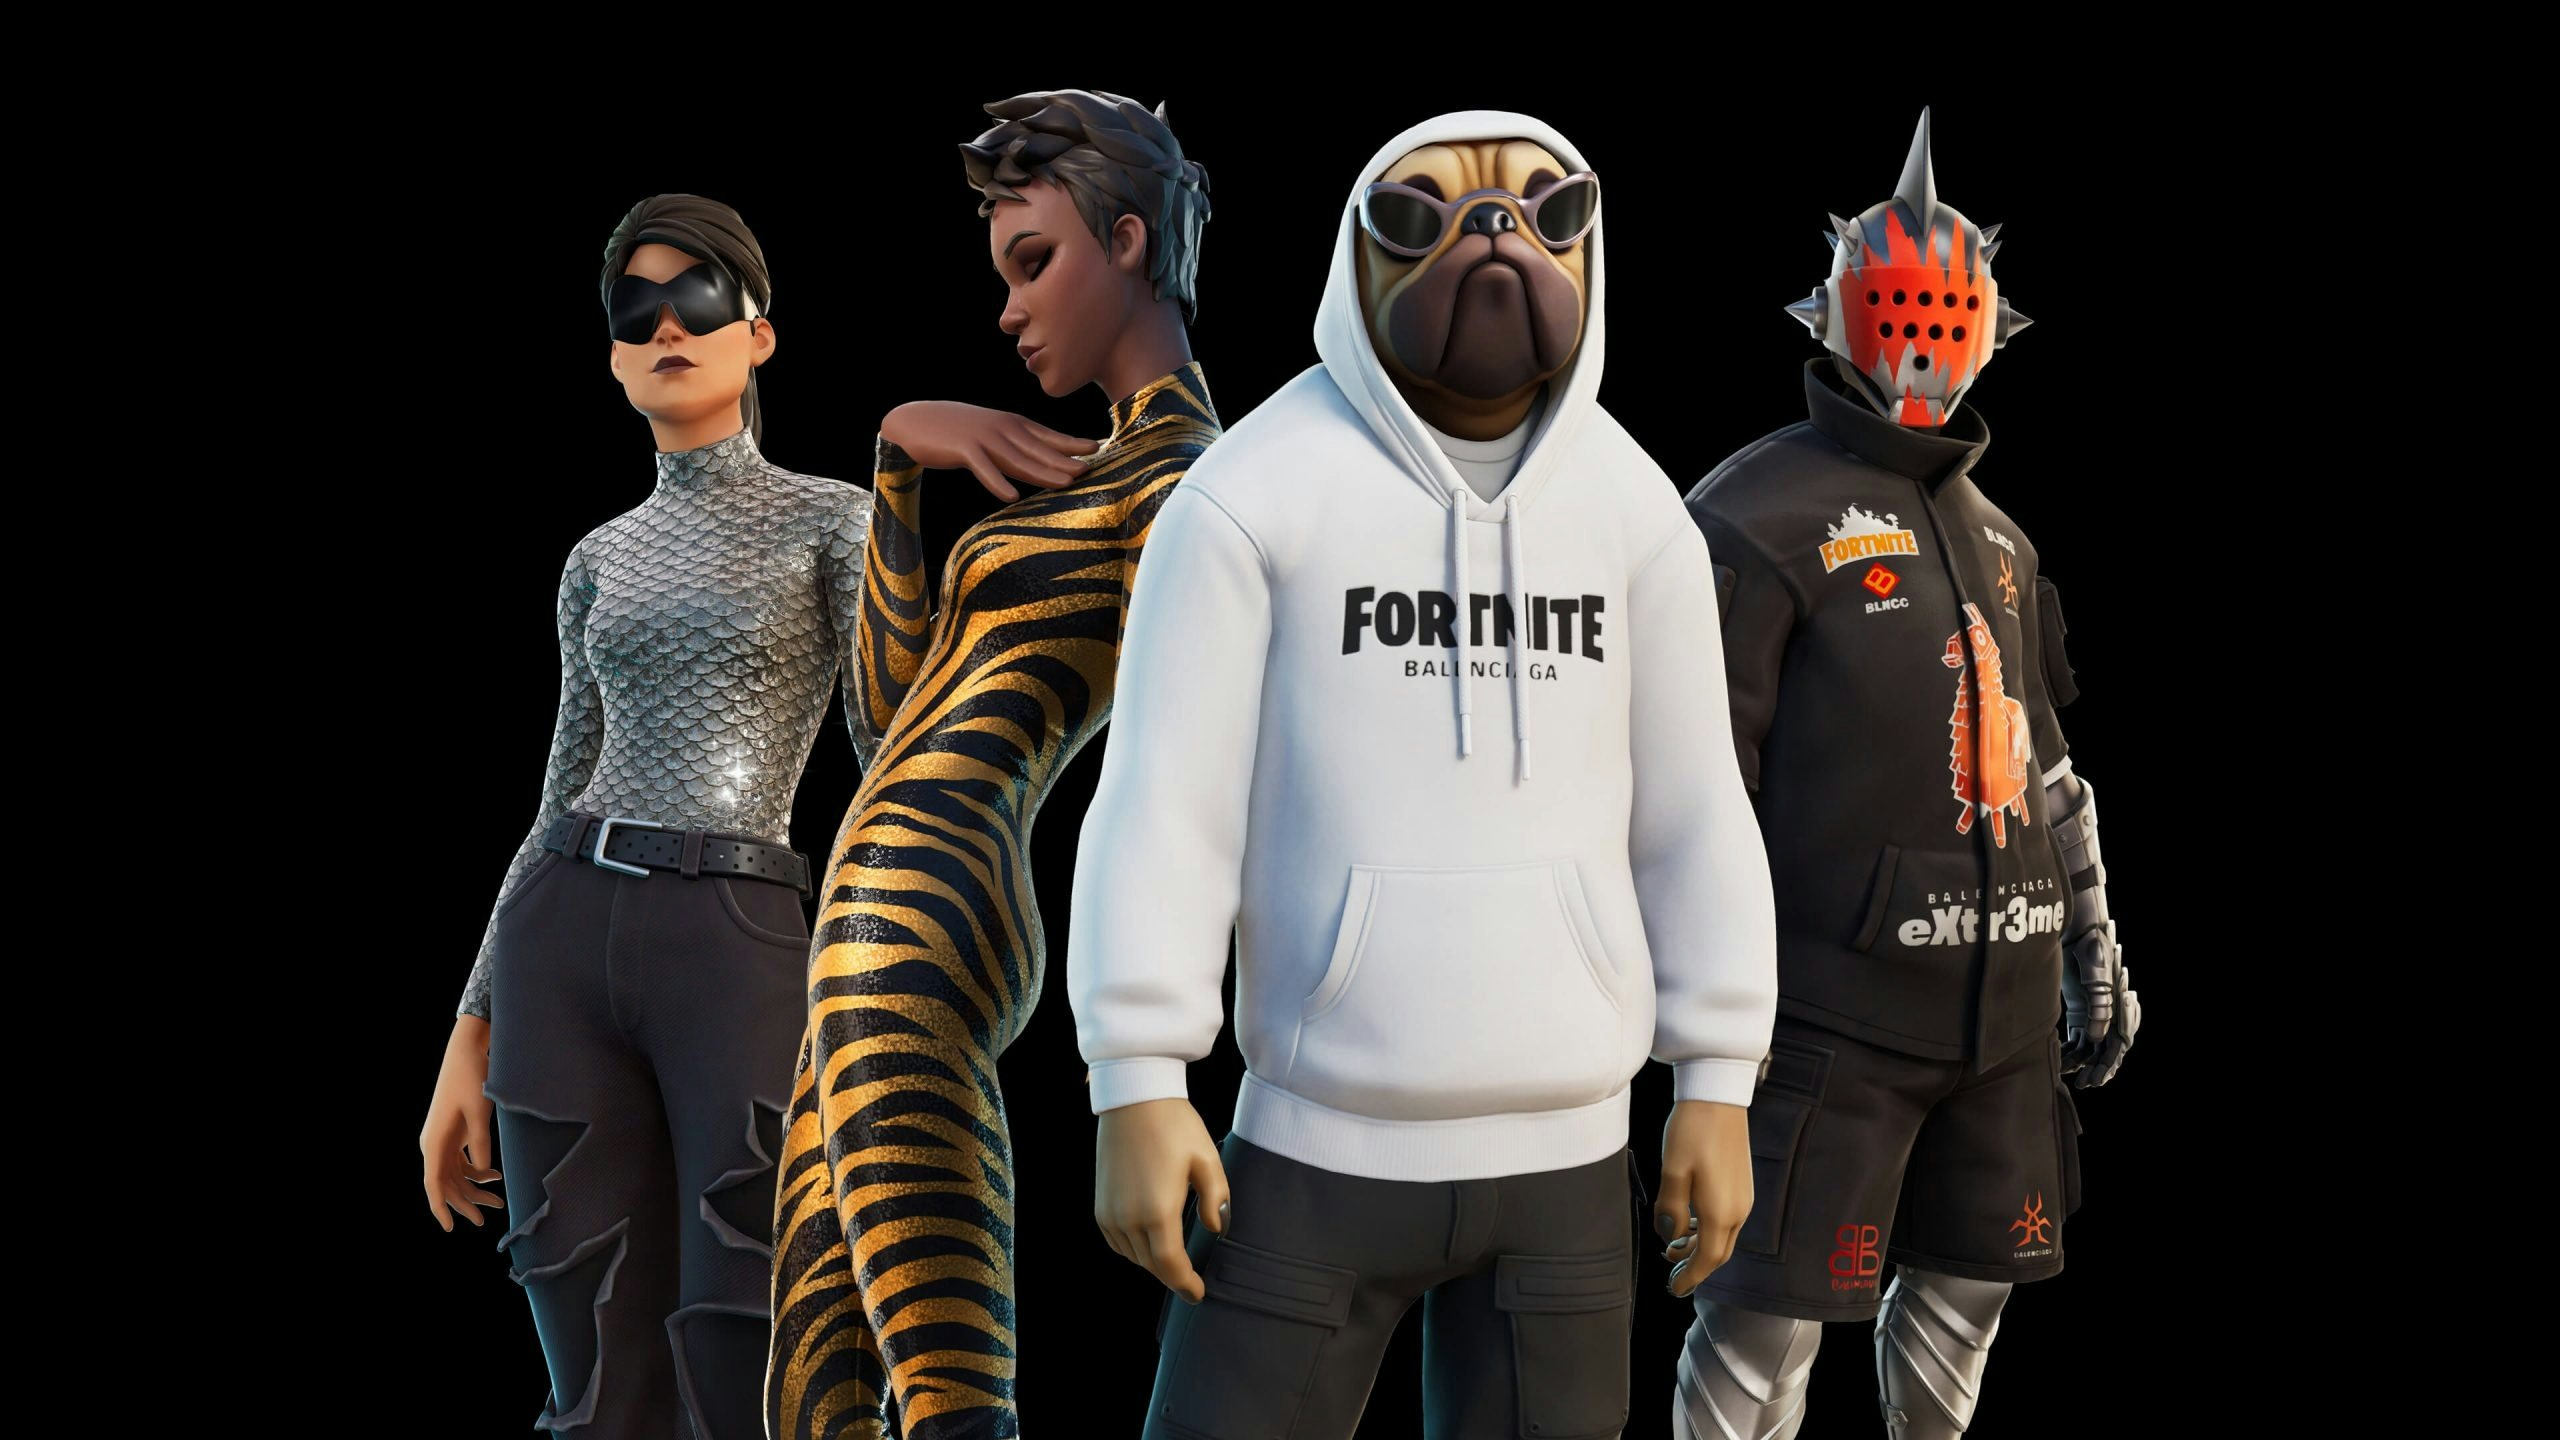 NFTs? Skins? CryptoPunks? You’re already fed up with it all? You think it’s just noise? For luxury, it’s more exciting than you think. Photo: Balenciaga x Fortnite